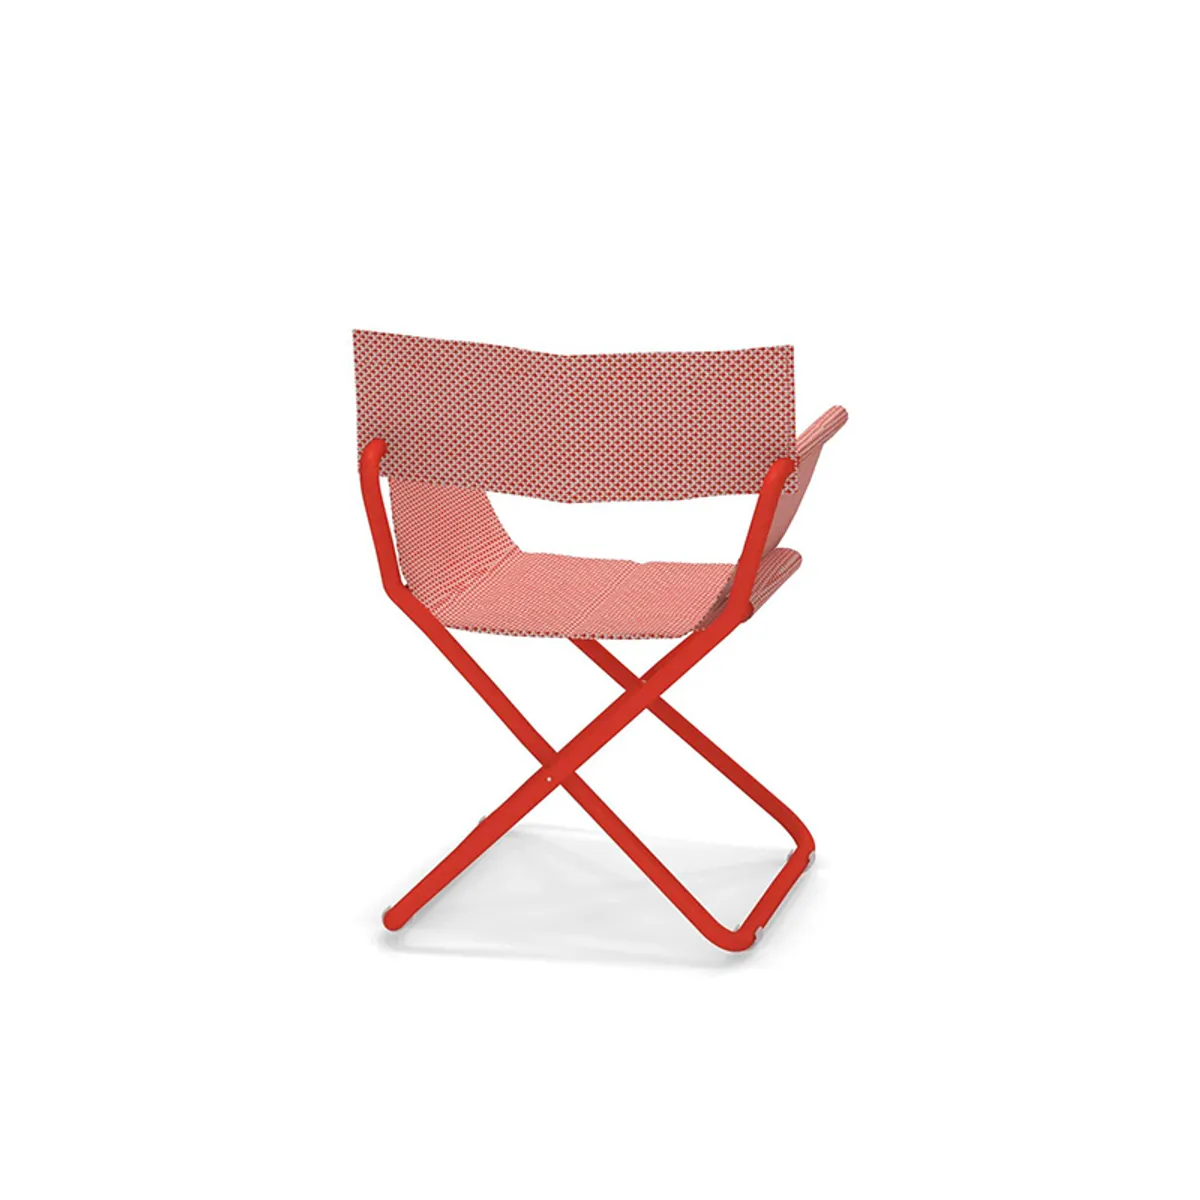 Snooze Folding Chair For Outdoor Areas 021